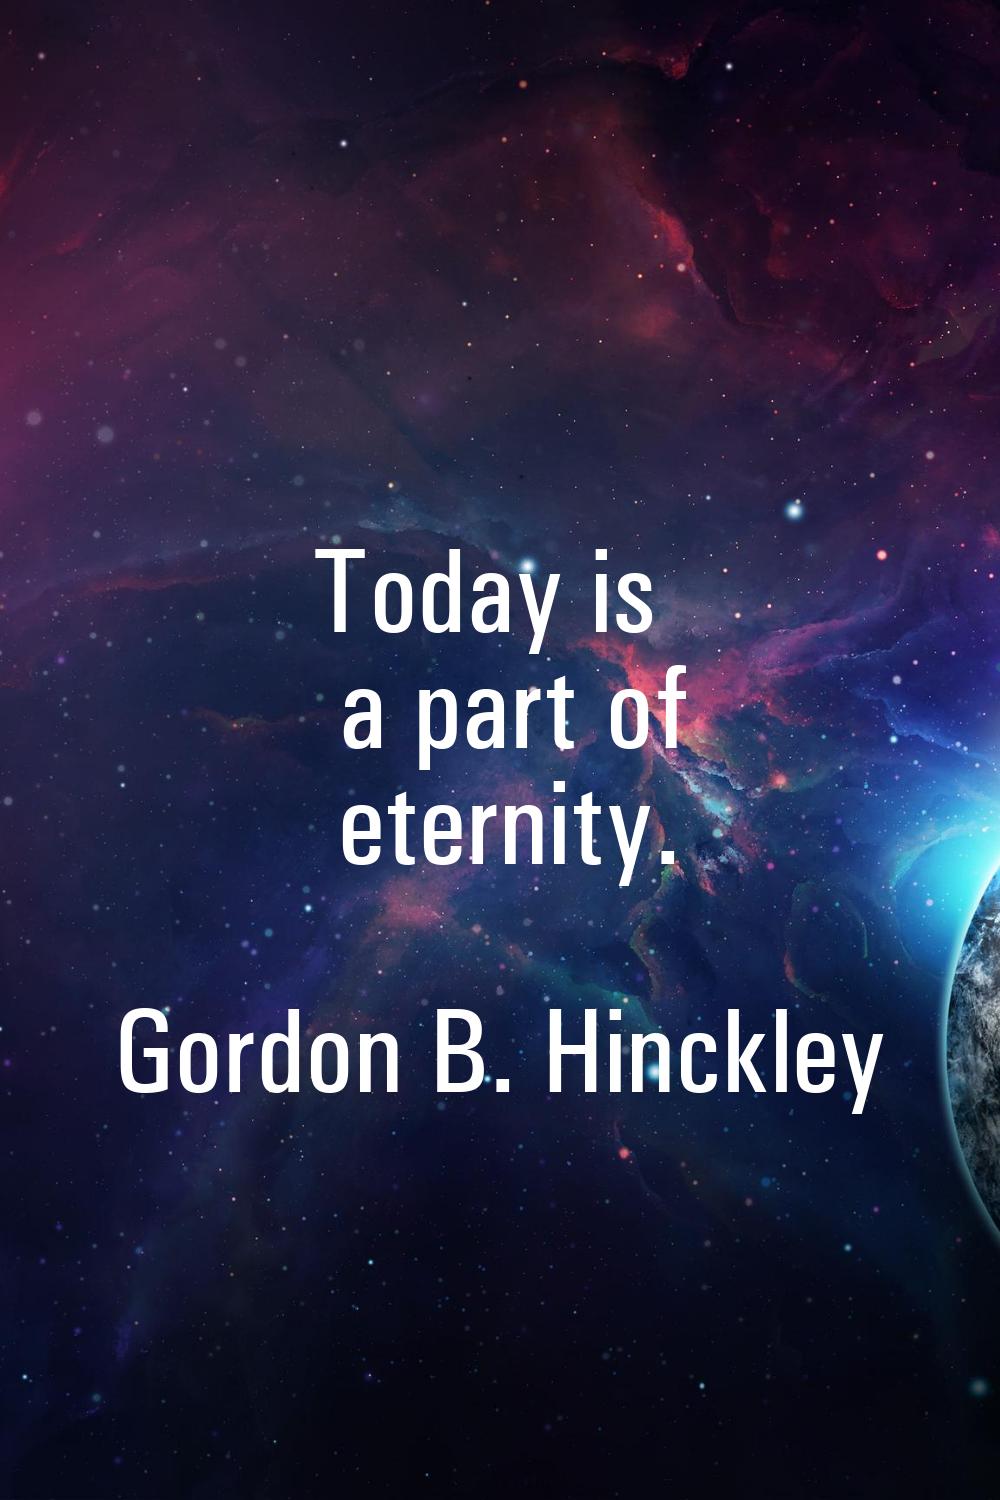 Today is a part of eternity.